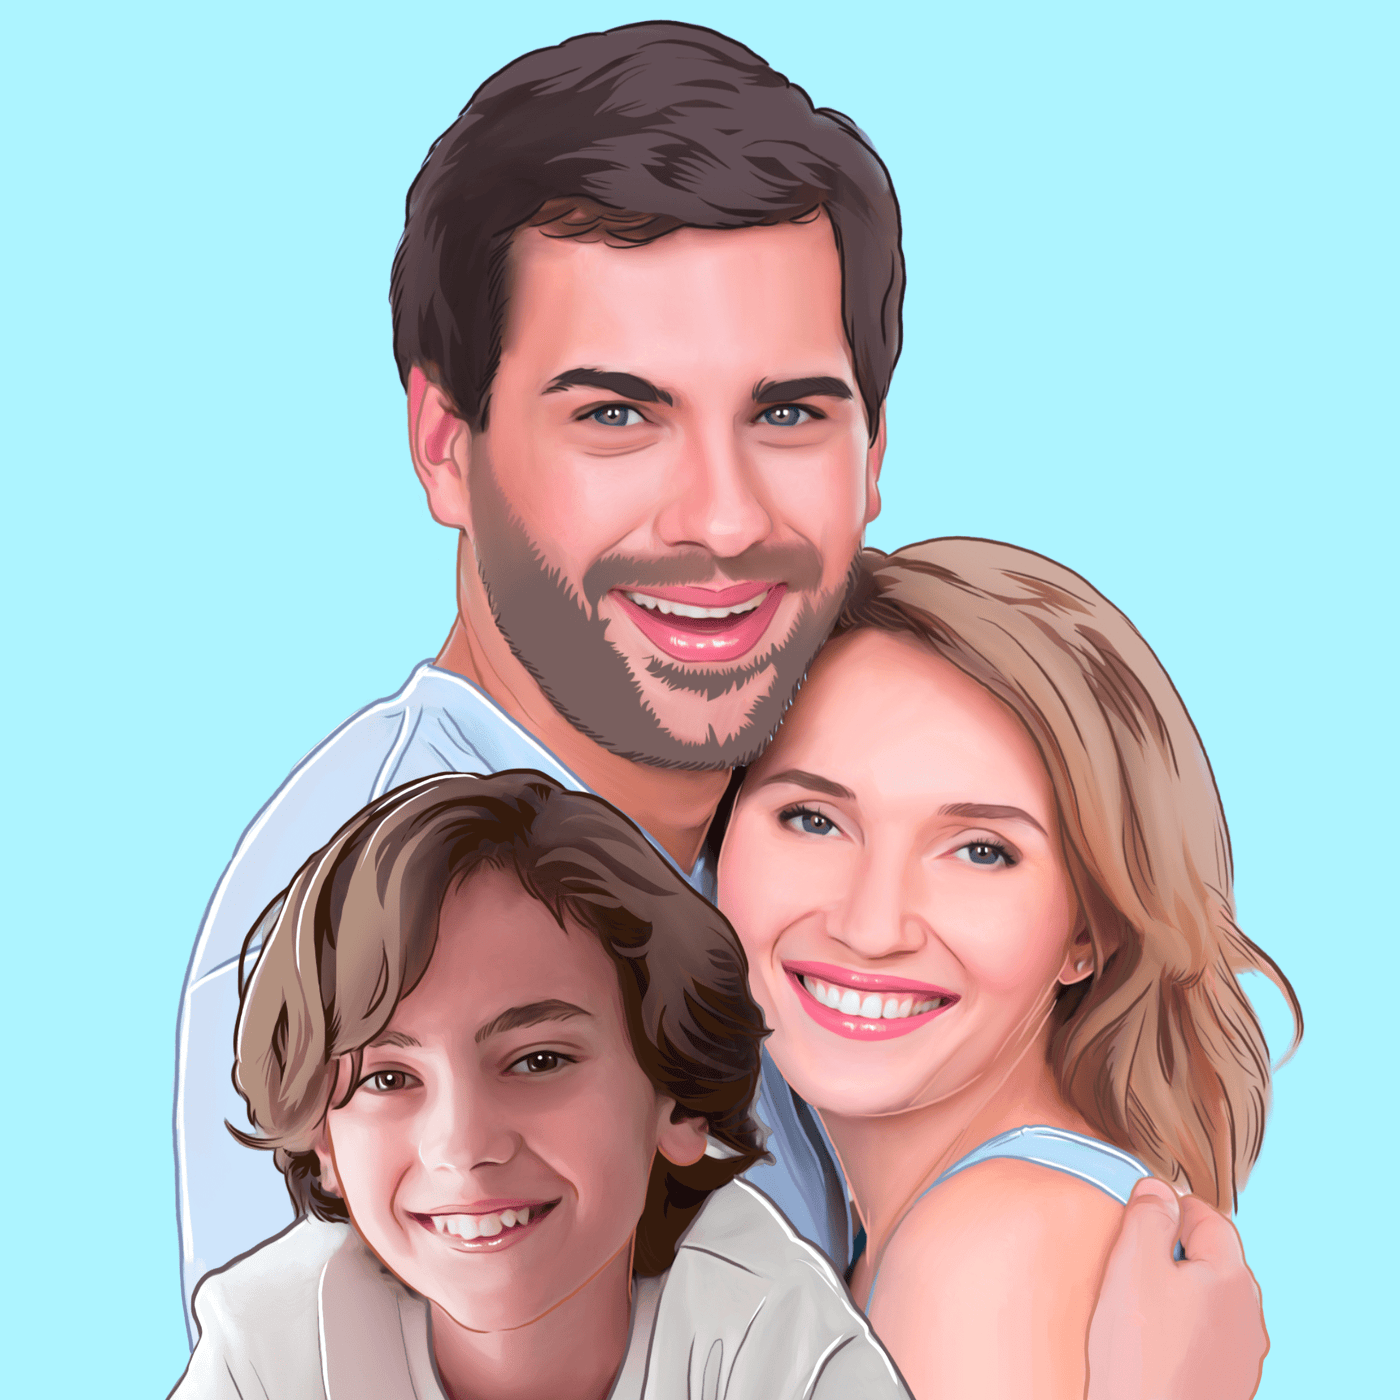 thanksgiving vector art of a happy family